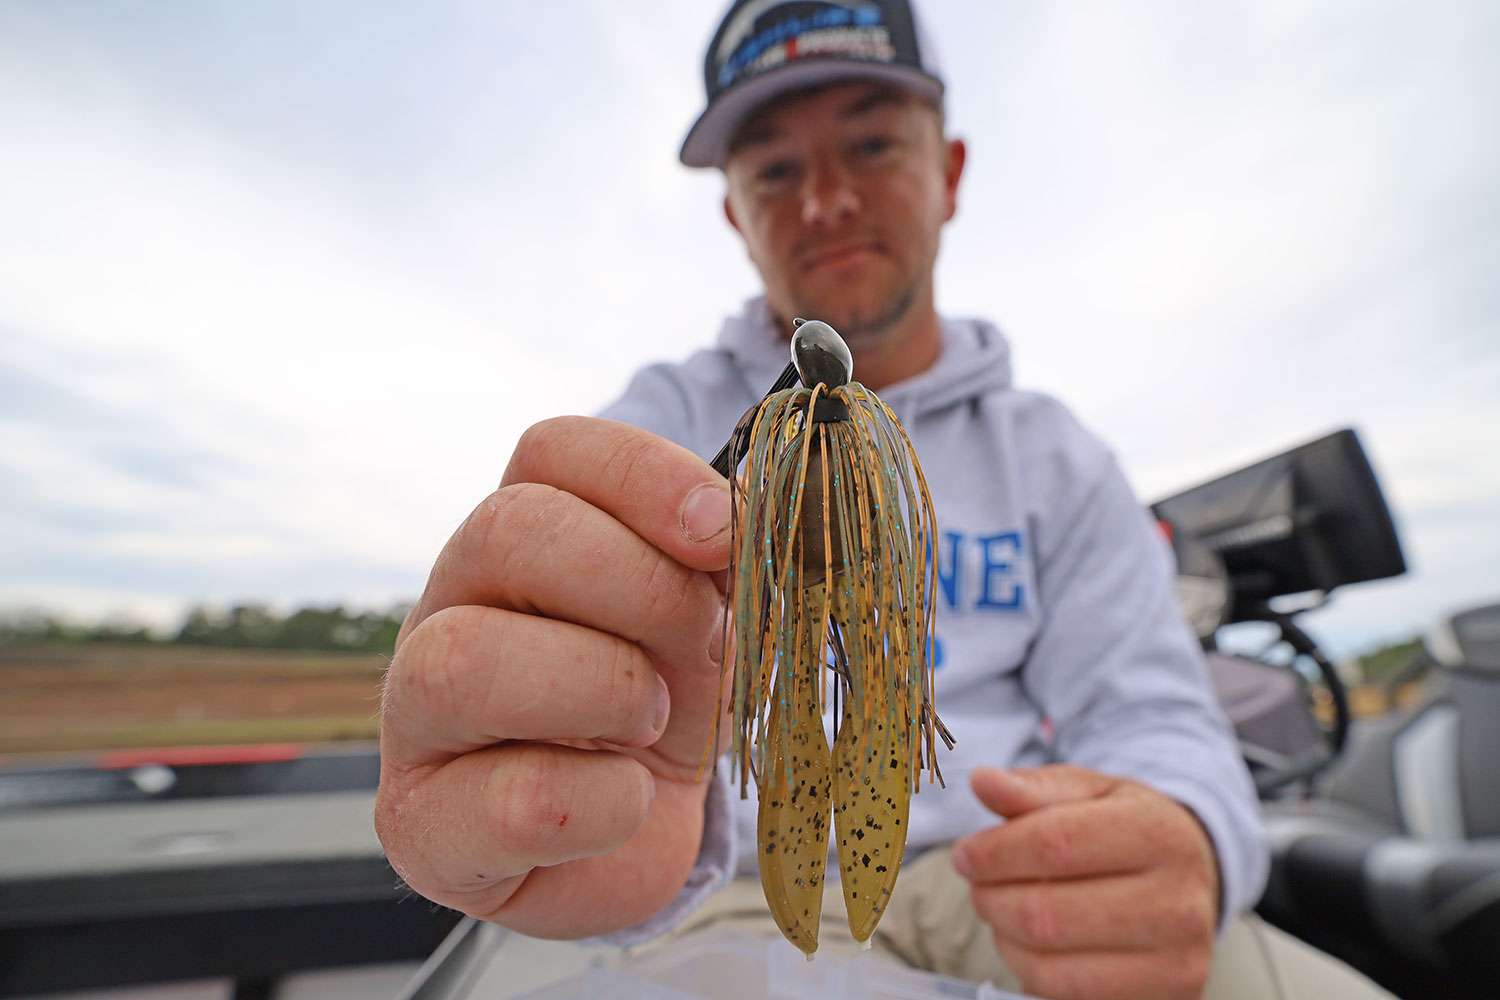 A Dirty Jigs jig is a staple in Logan's collection, but he said for anglers wanting to catch more bass more often need to learn it right away.